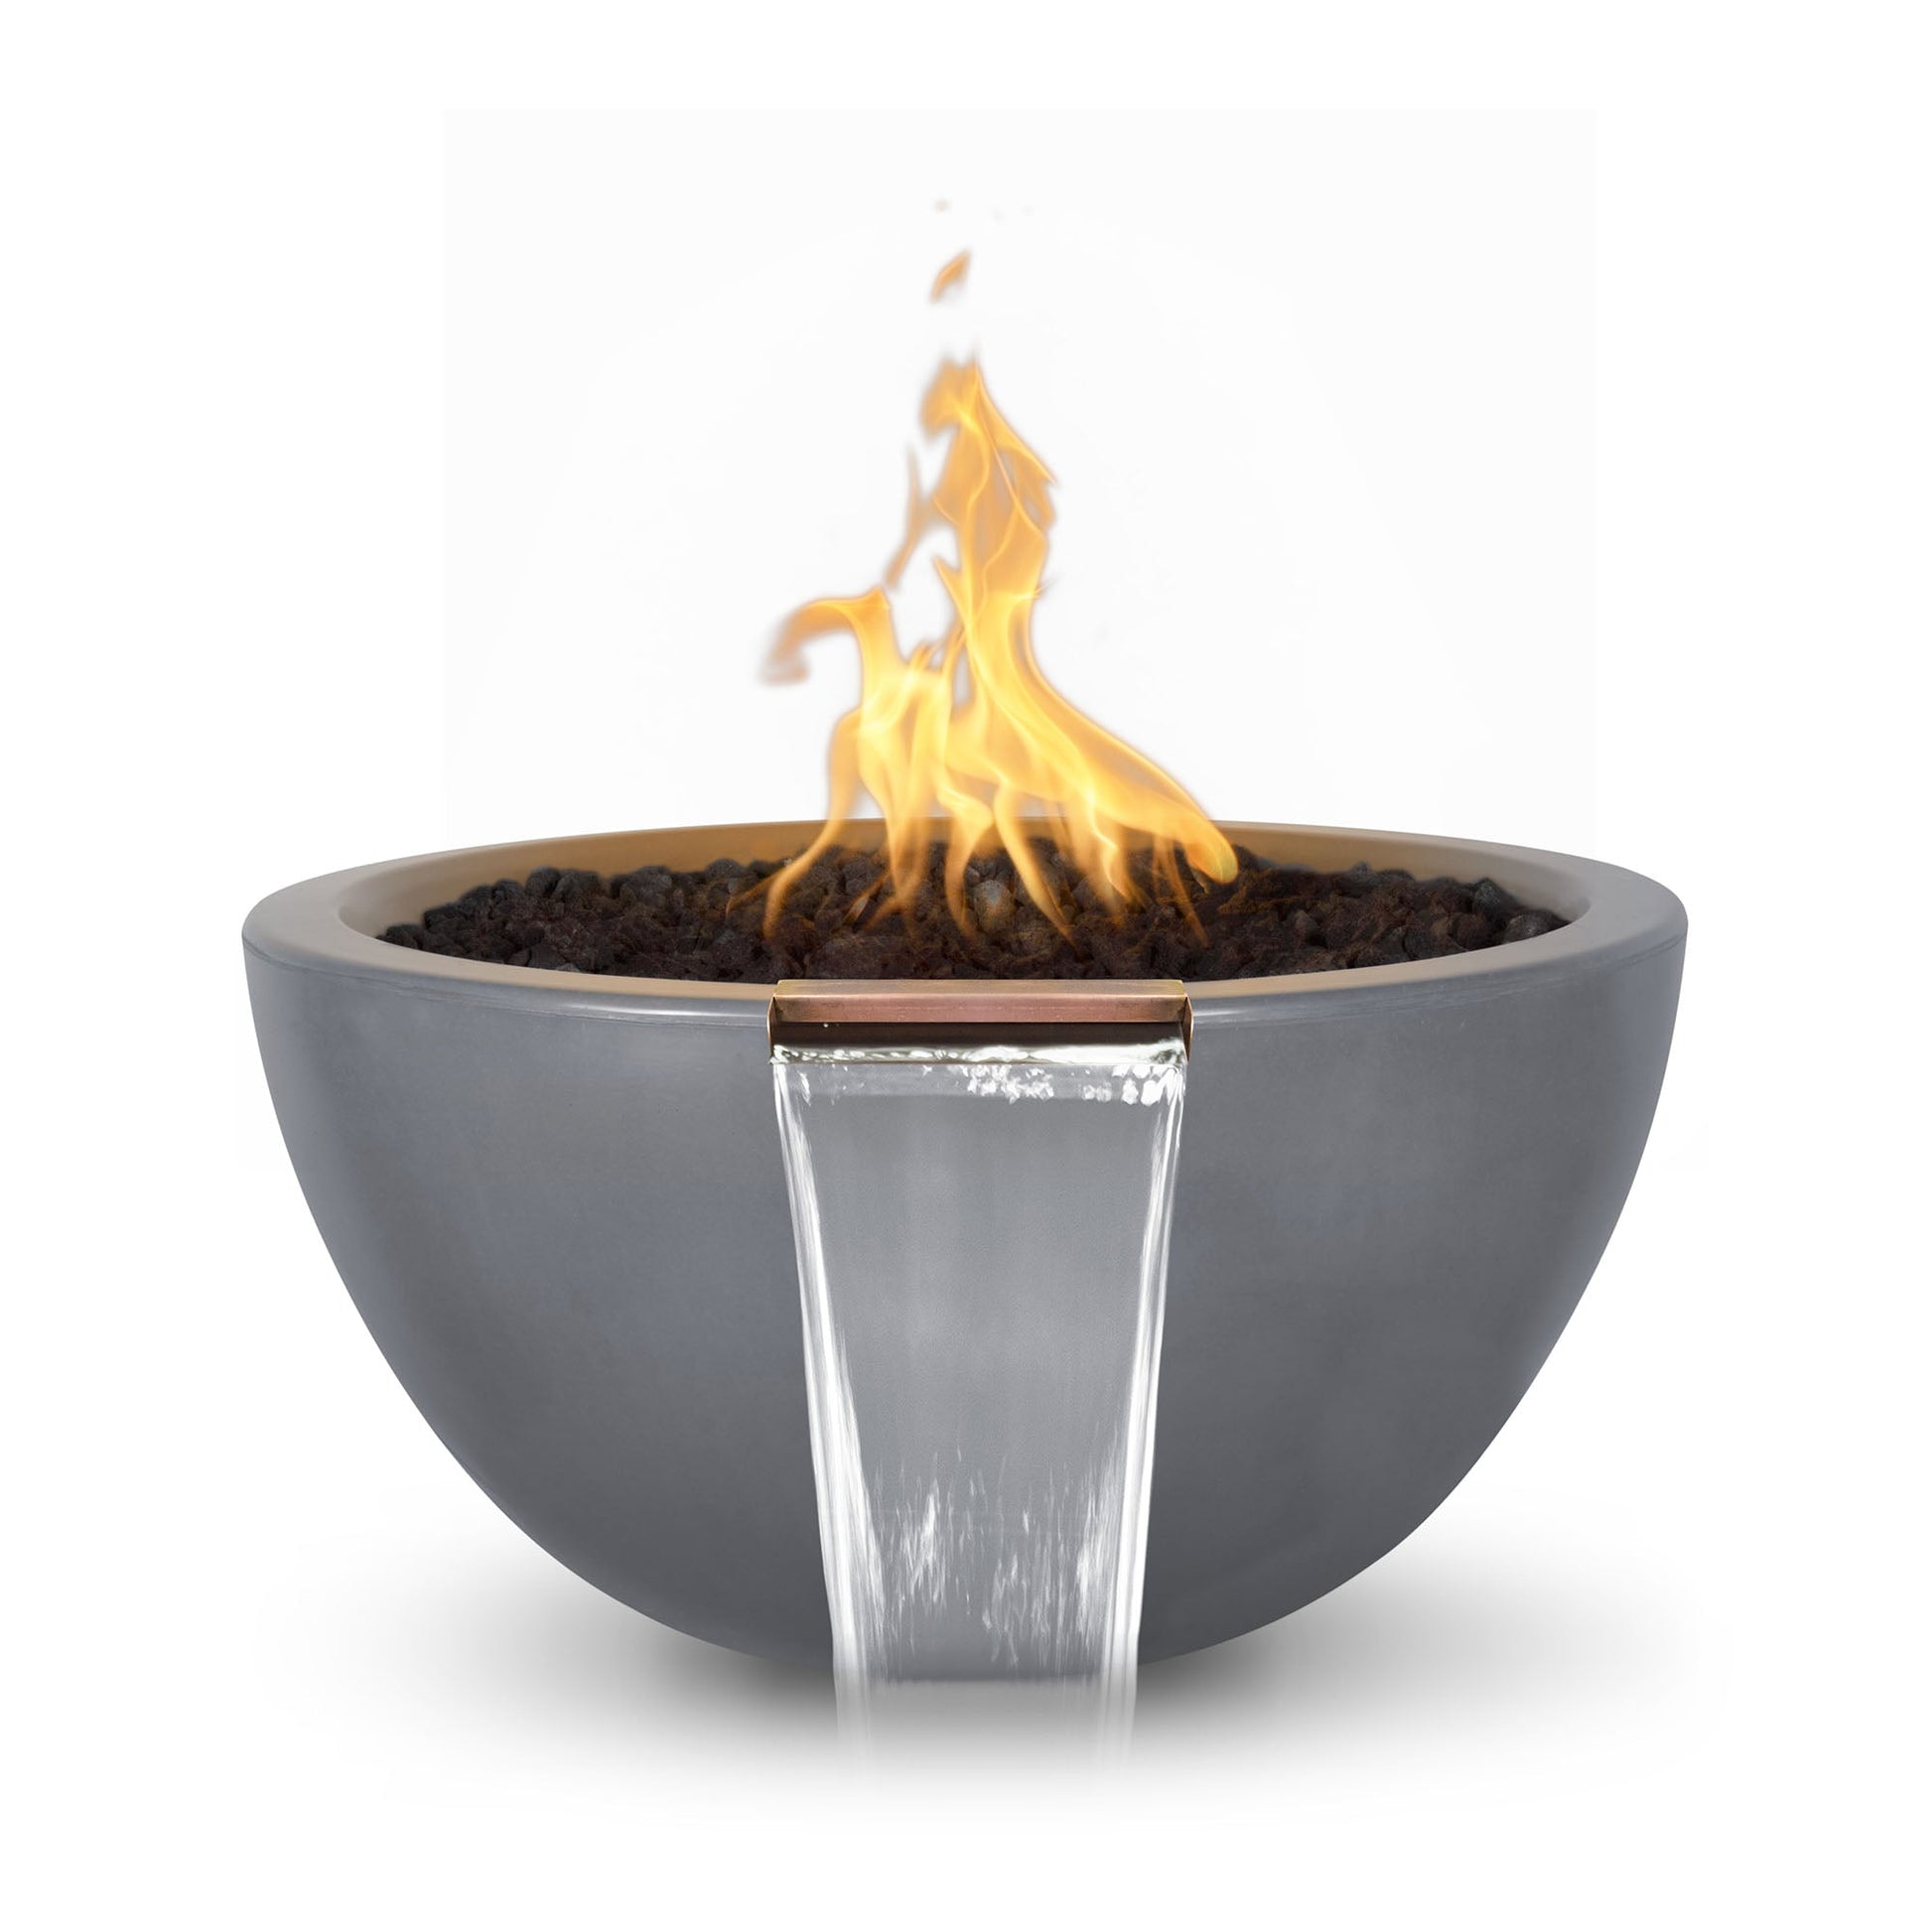 The Outdoor Plus Round Luna 38" Black GFRC Concrete Liquid Propane Fire & Water Bowl with Match Lit with Flame Sense Ignition